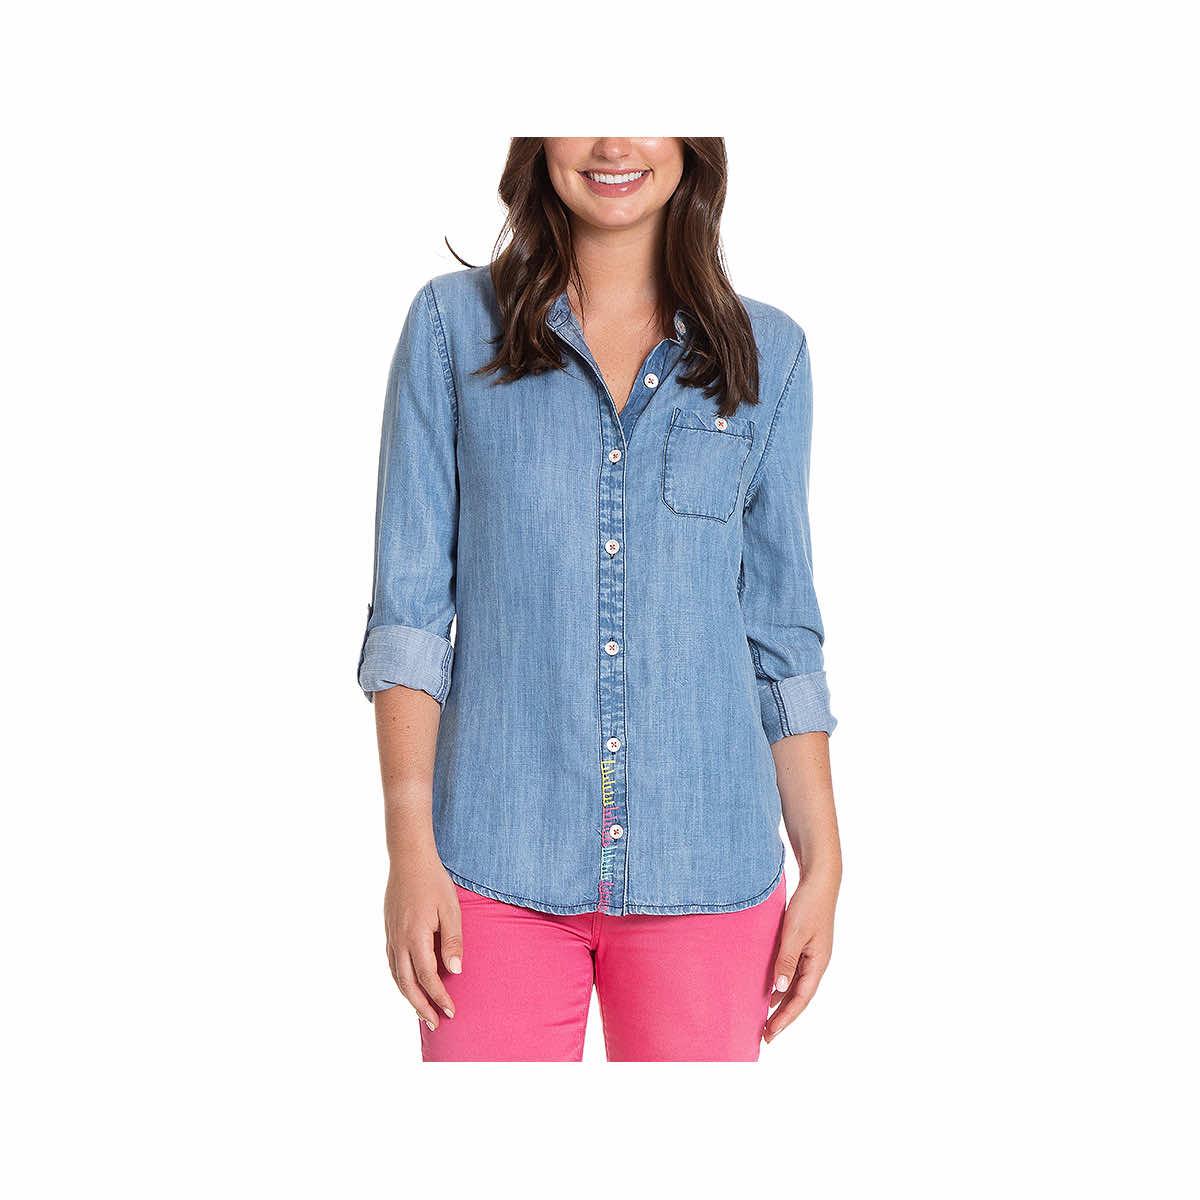  Women's Embroidered Chambray Button Up Shirt